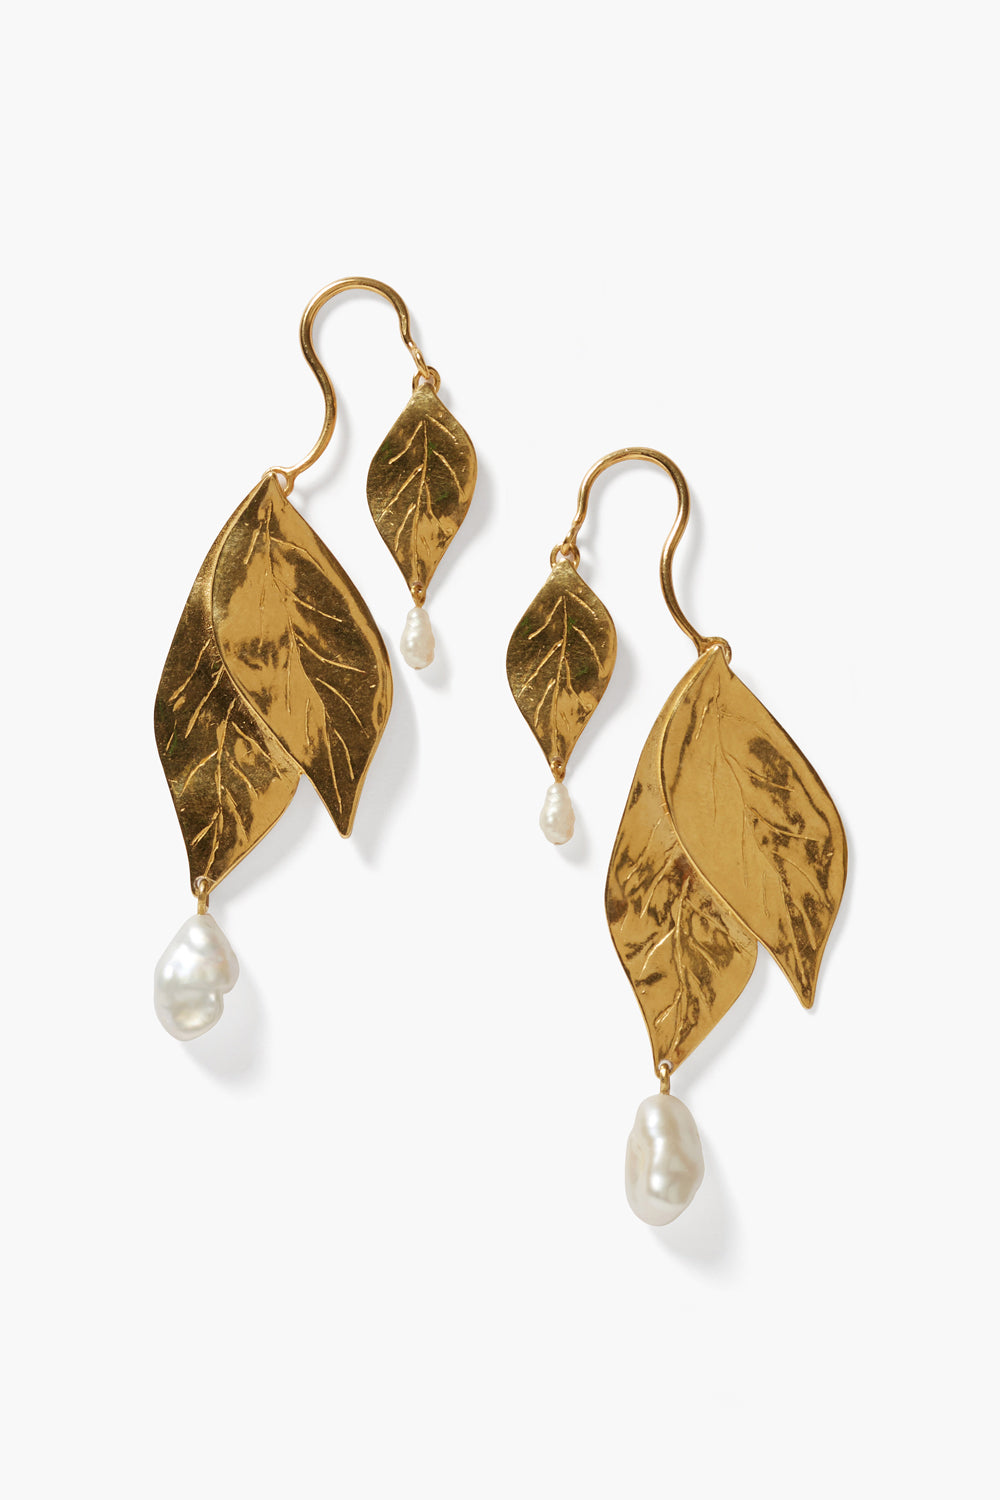 Four Tiered White Keshi Pearl Earrings by Chan Luu | Gold/White Pearl